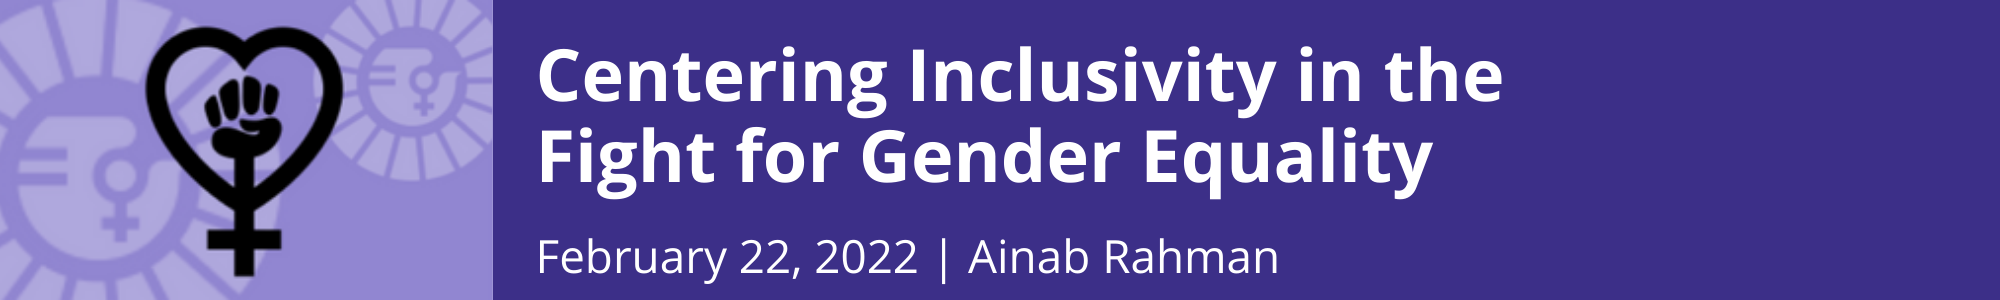 Centering Inclusivity in the Fight for Gender Equality